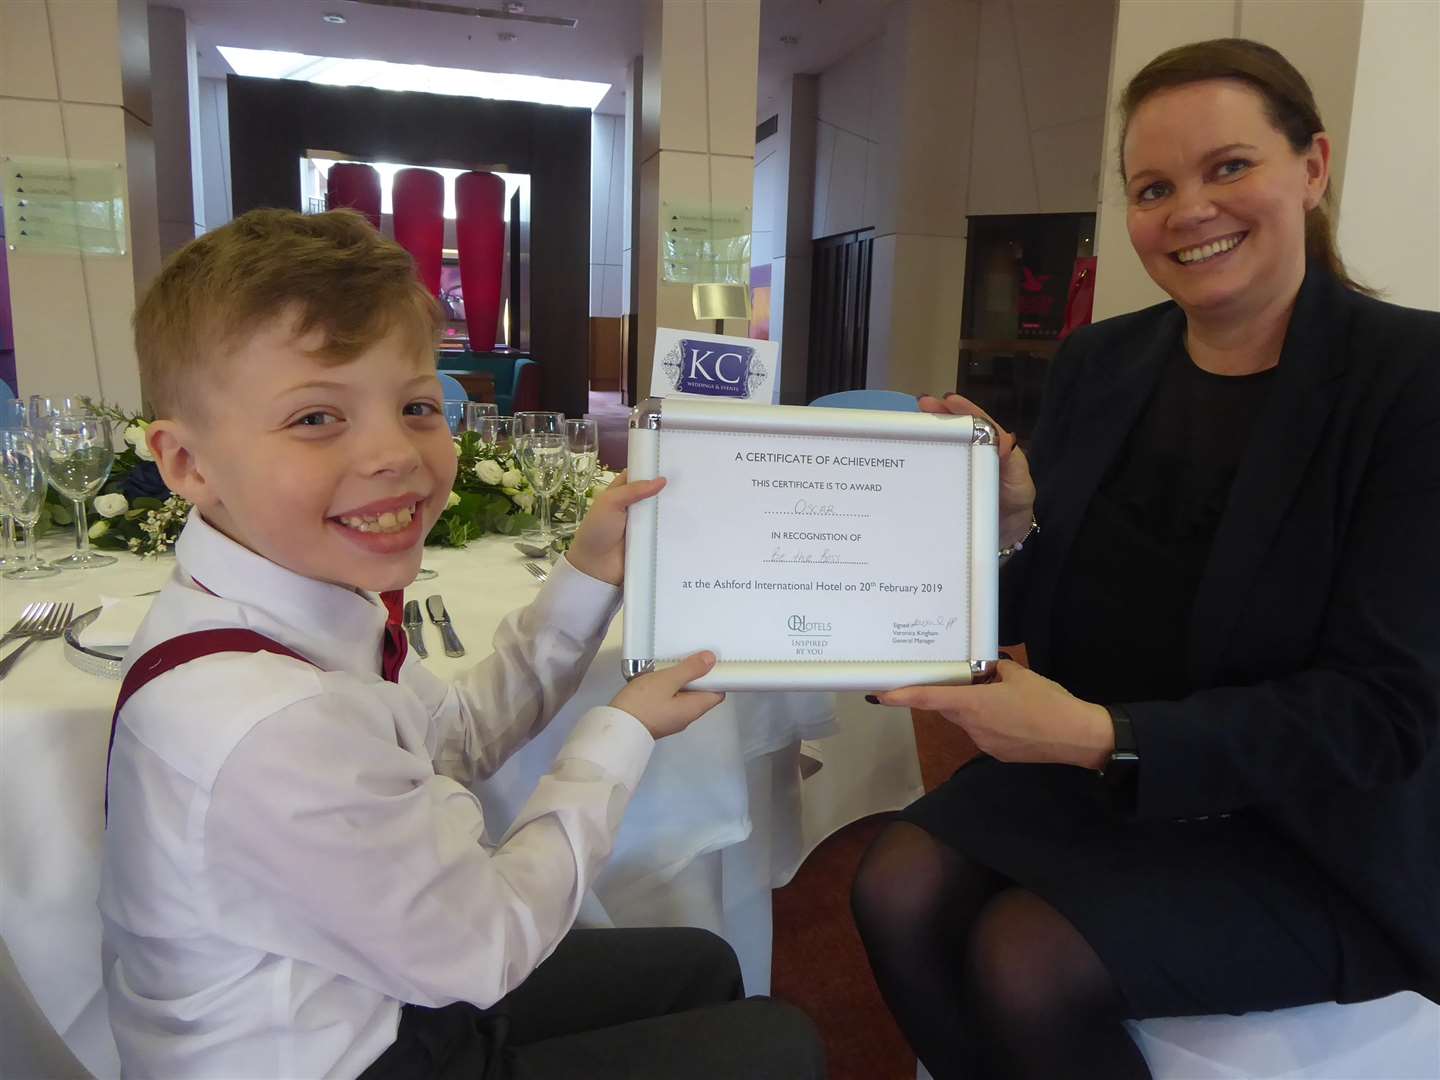 Oscar Hollis, eight, of Tiger Primary School in Maidstone, receives a Be the Boss certificate from Lynette Wood of Ashford International Hotel.